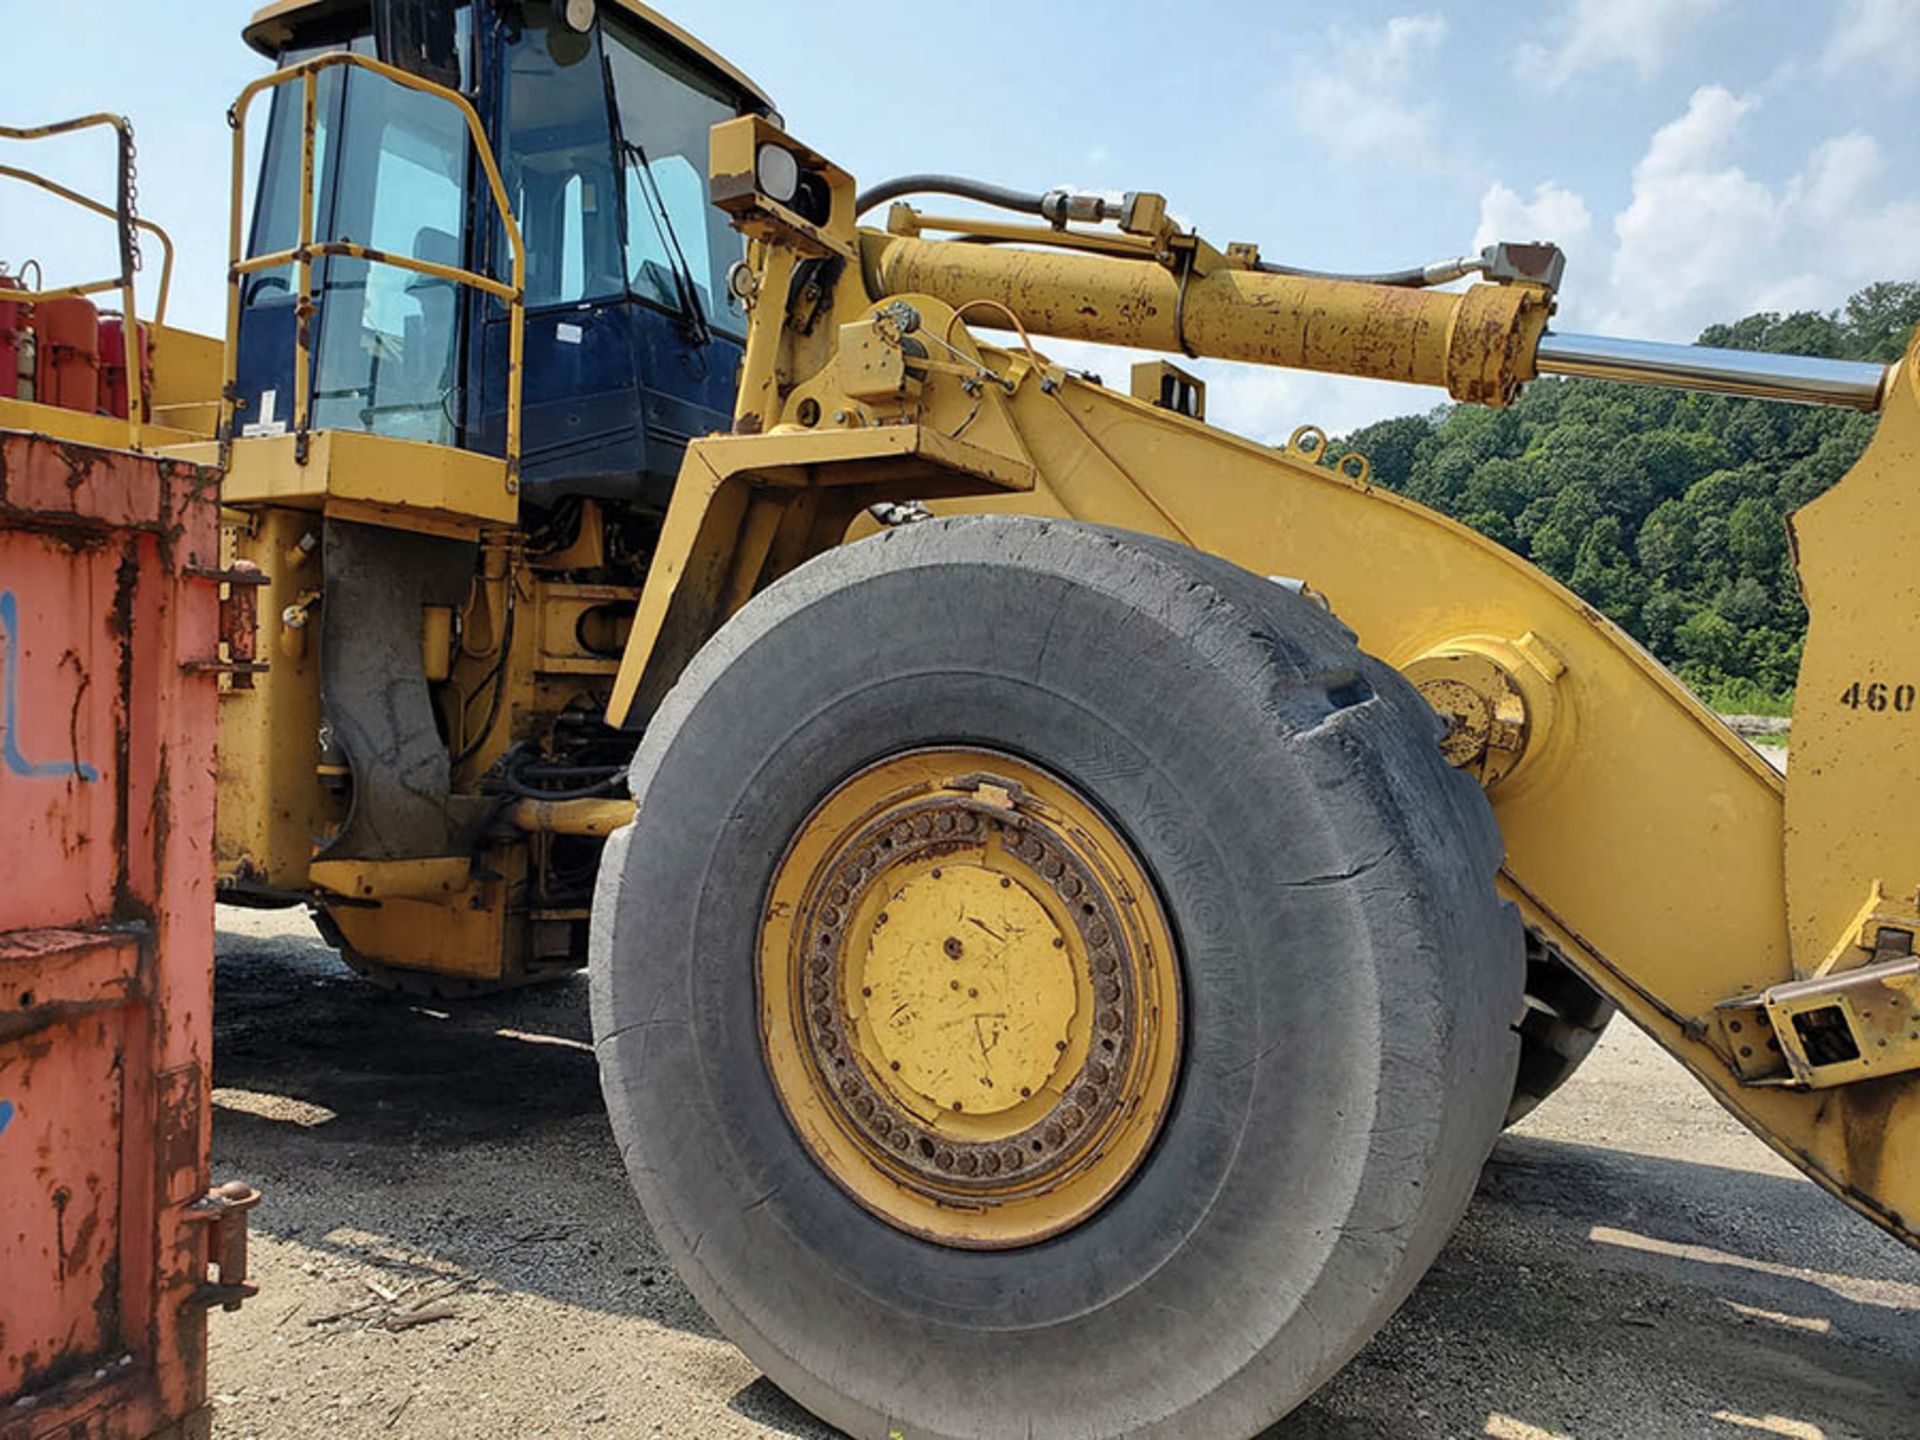 CATERPILLAR 988G WHEEL LOADER, S/N: CAT0988GVBNH00460, HOURS UNKNOWN, CAT 6-CYLINDER TURBO DIESEL - Image 6 of 10